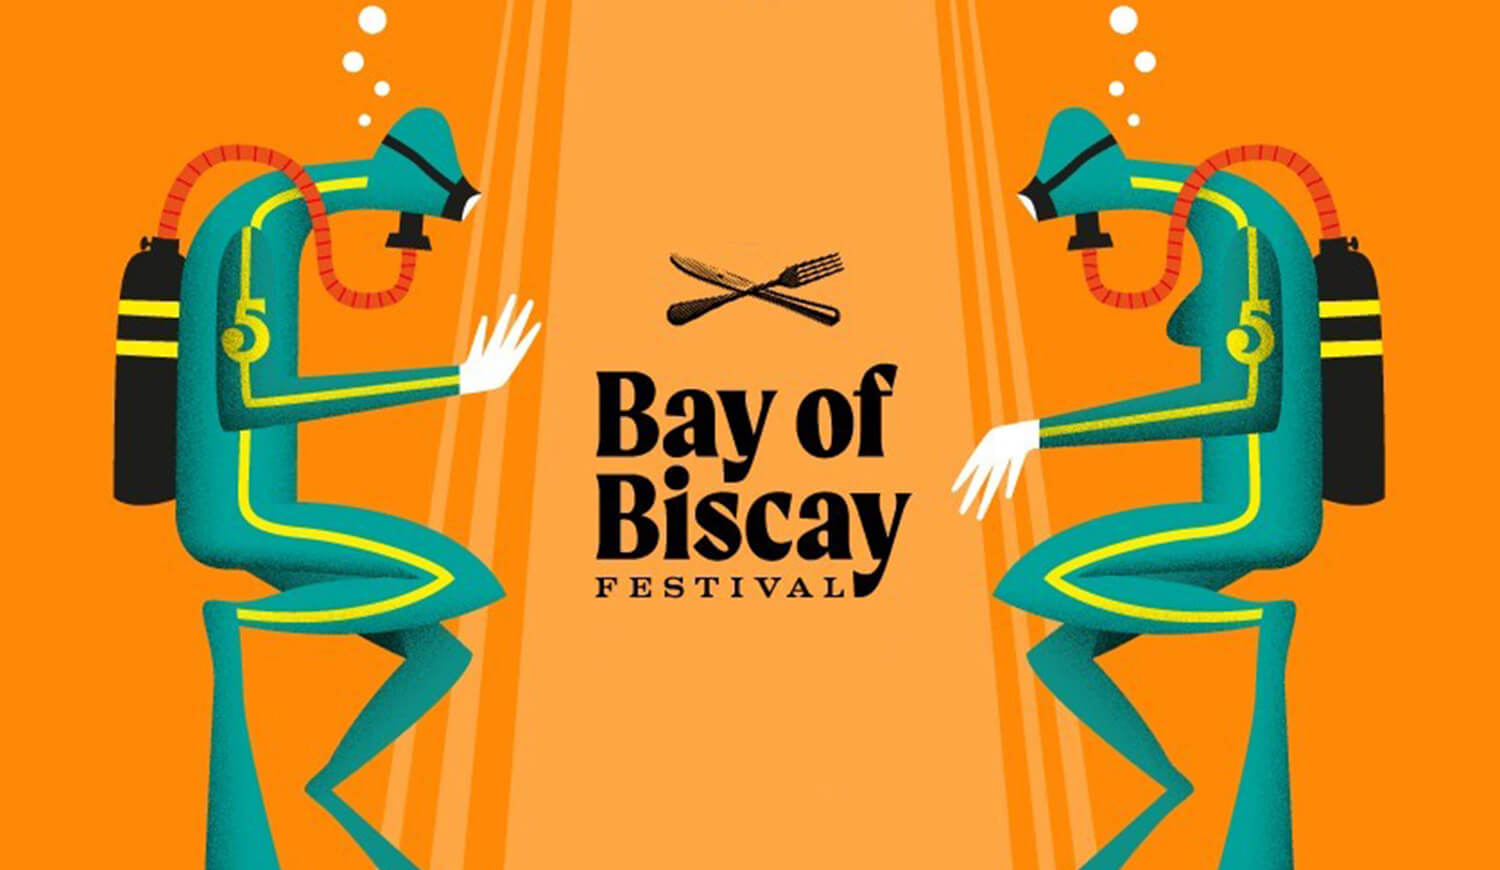 Bay of Biscay Festival